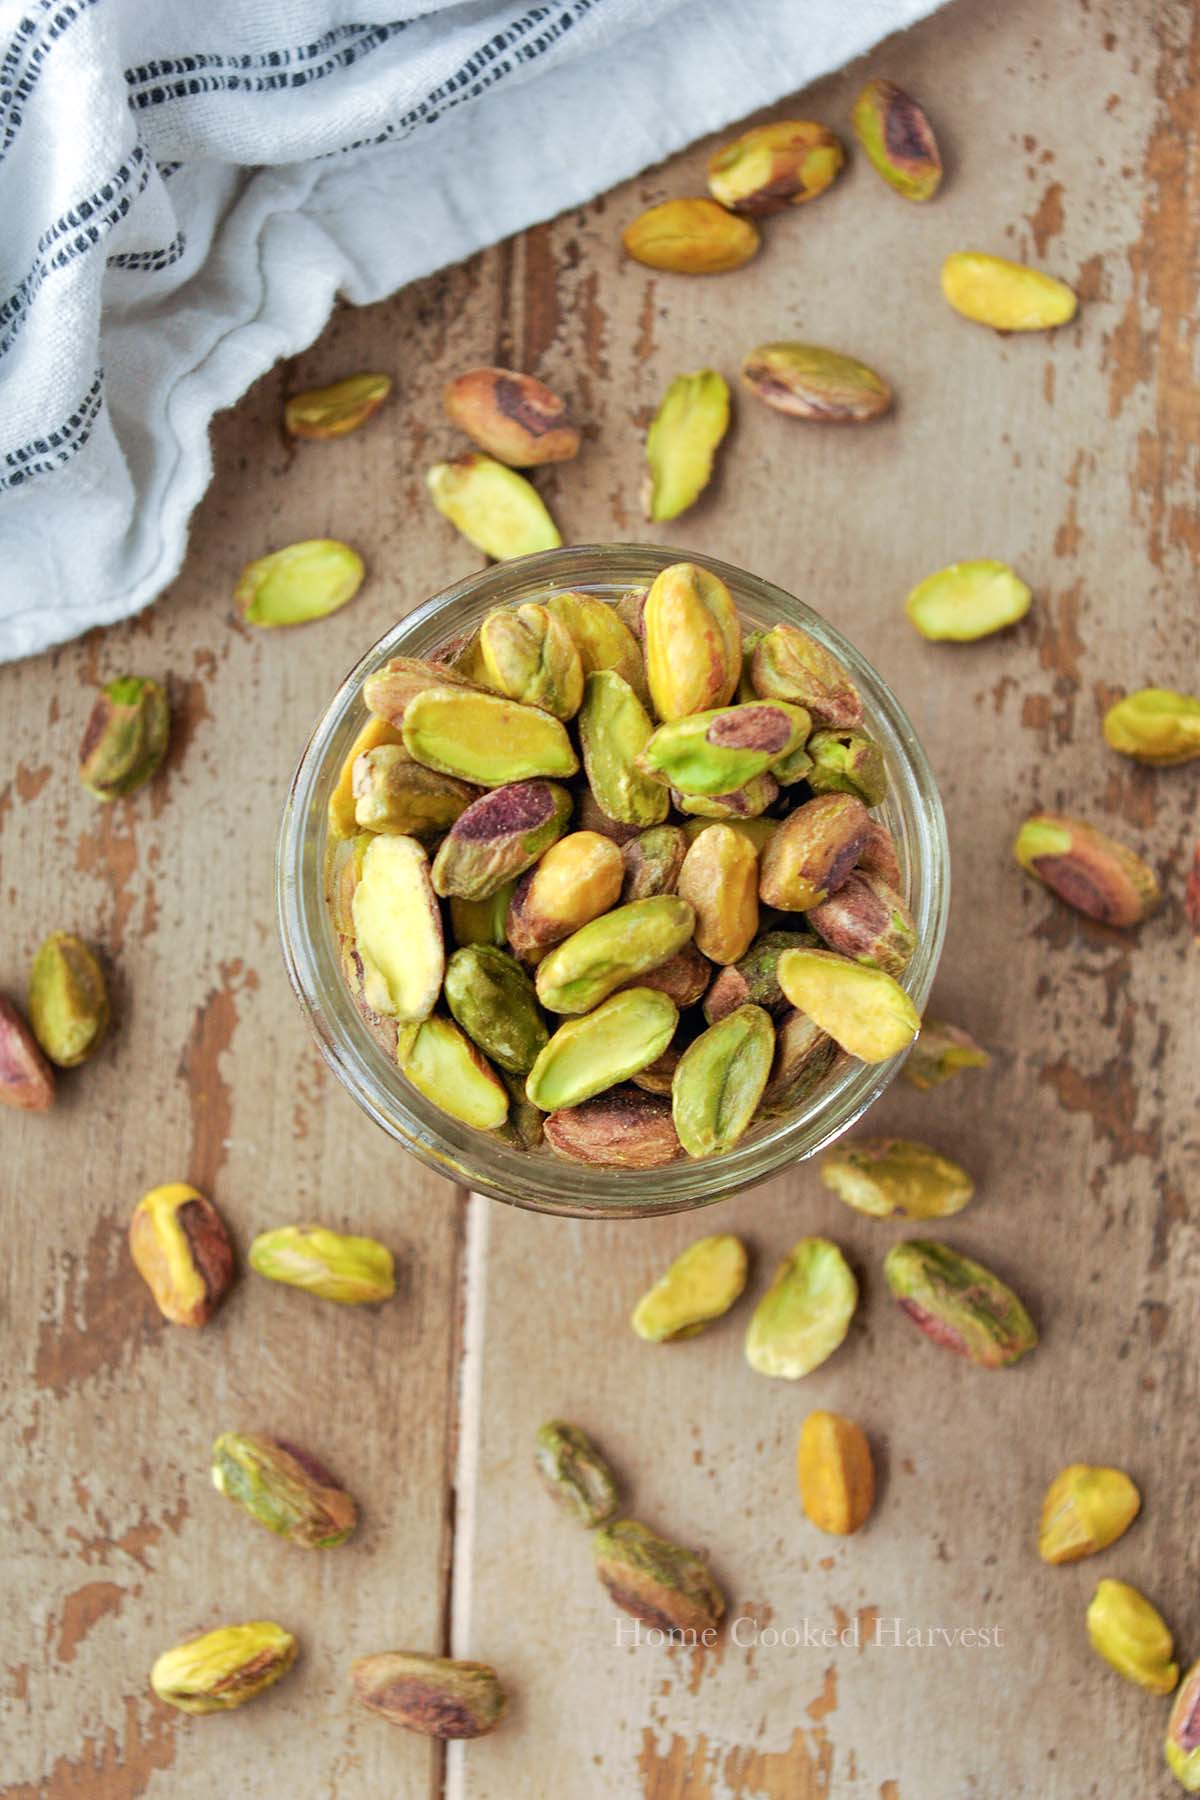 Roasted pistachios in a glass cup with pistachios around.